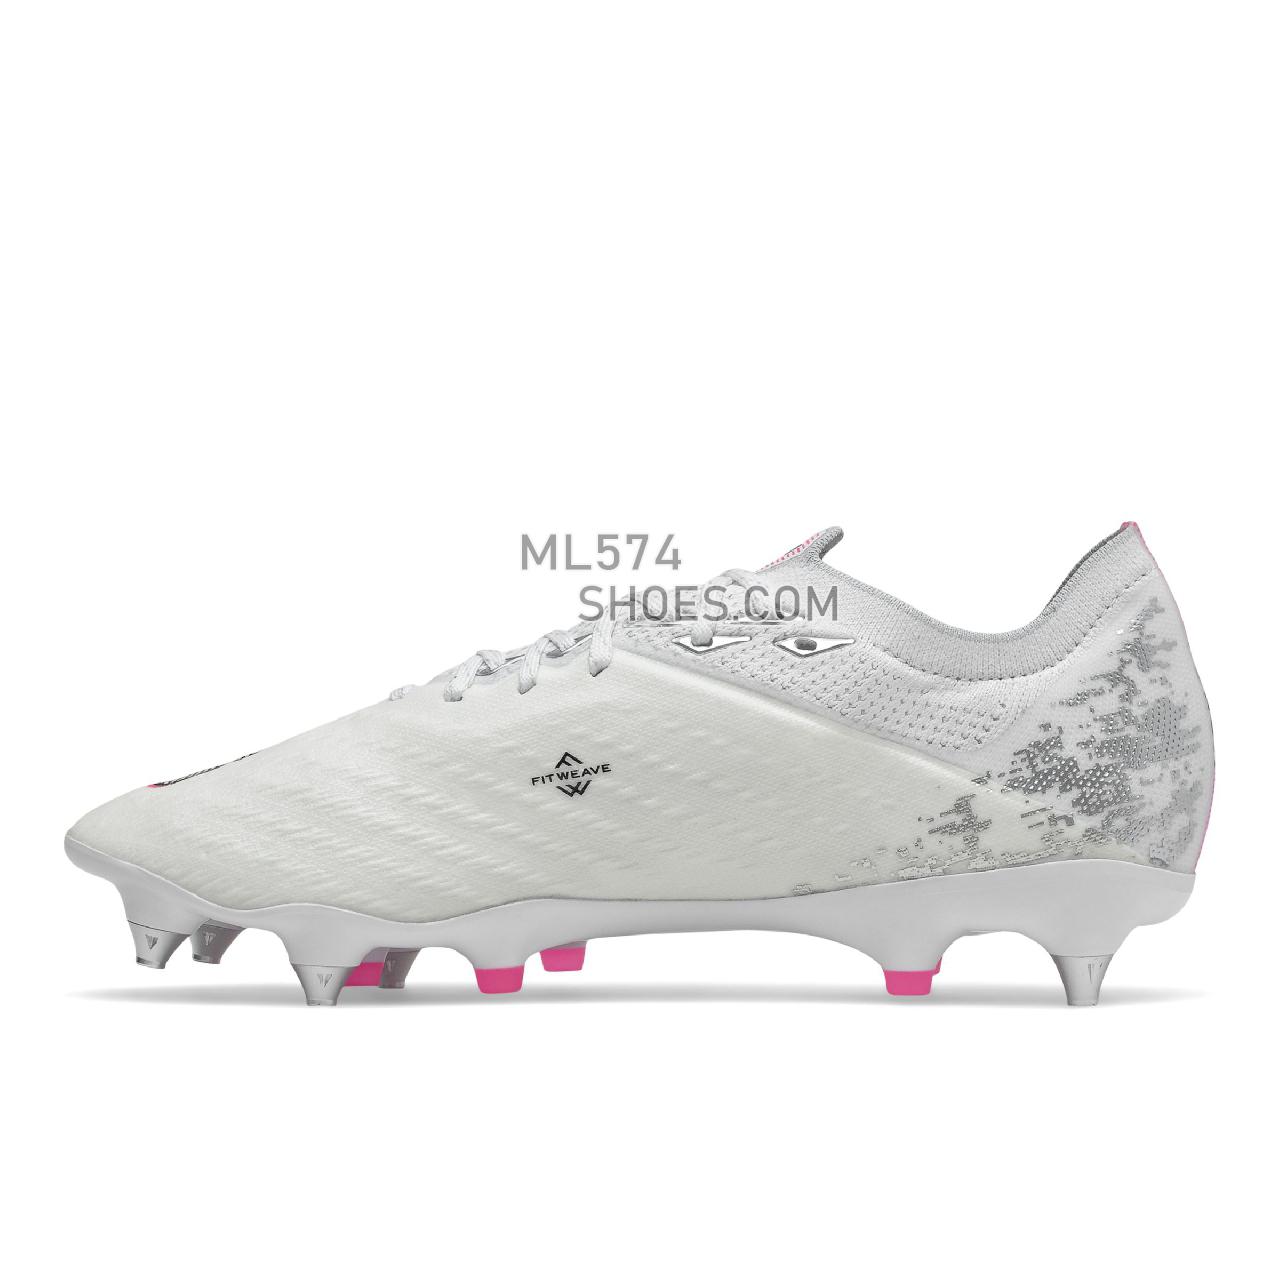 New Balance Furon V6+ Pro SG - Men's Soccer - White with Silver and Alpha Pink - MSF1SP65